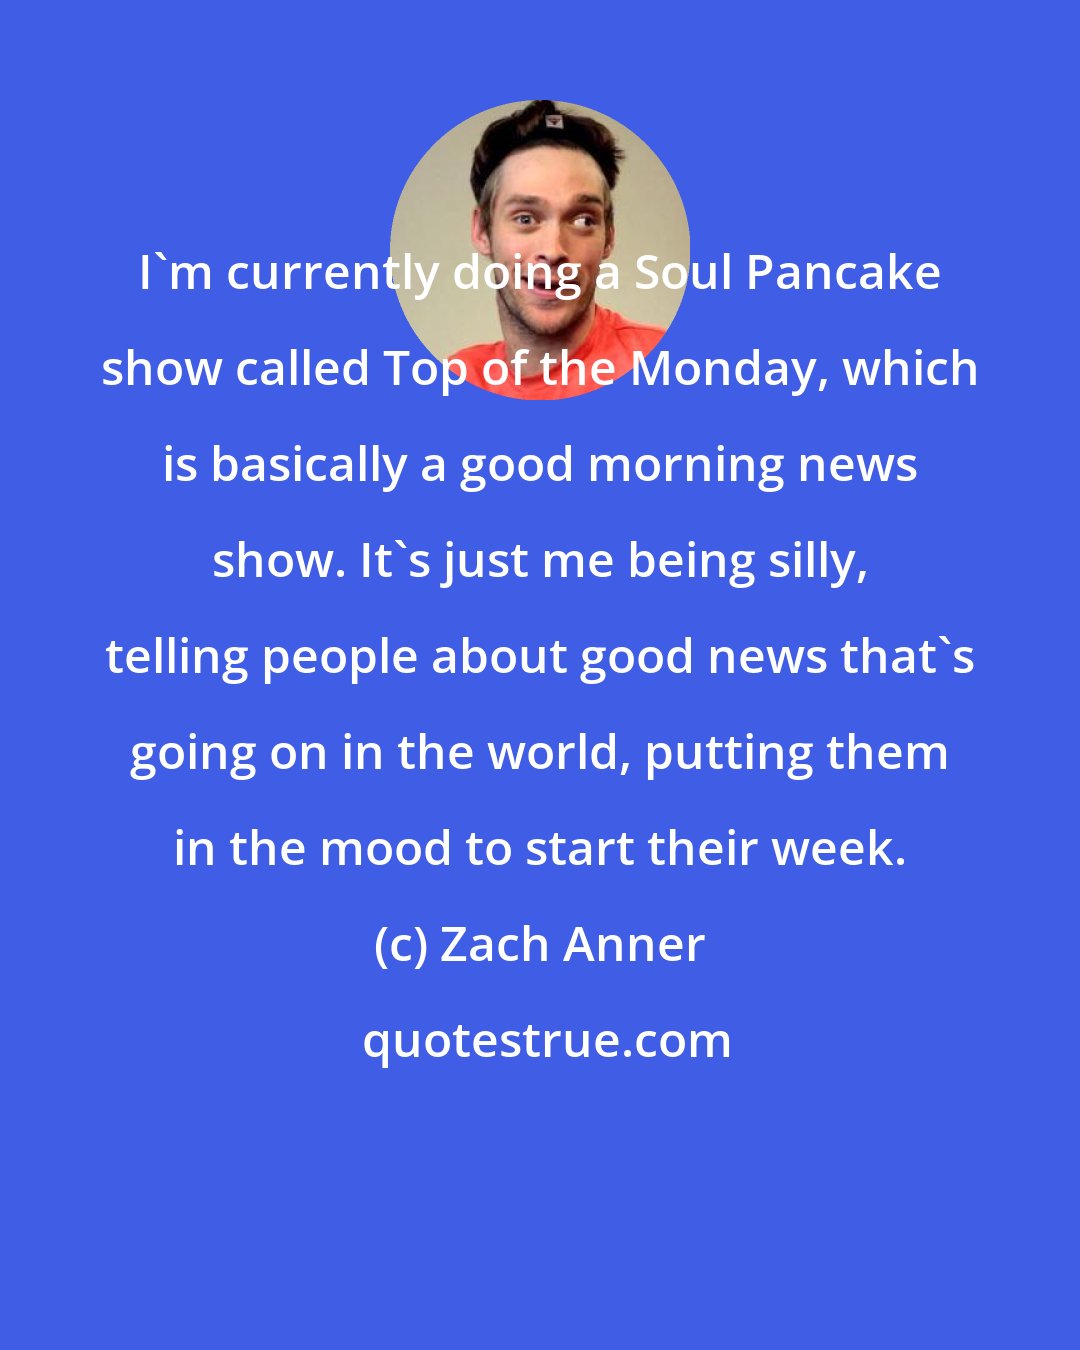 Zach Anner: I'm currently doing a Soul Pancake show called Top of the Monday, which is basically a good morning news show. It's just me being silly, telling people about good news that's going on in the world, putting them in the mood to start their week.